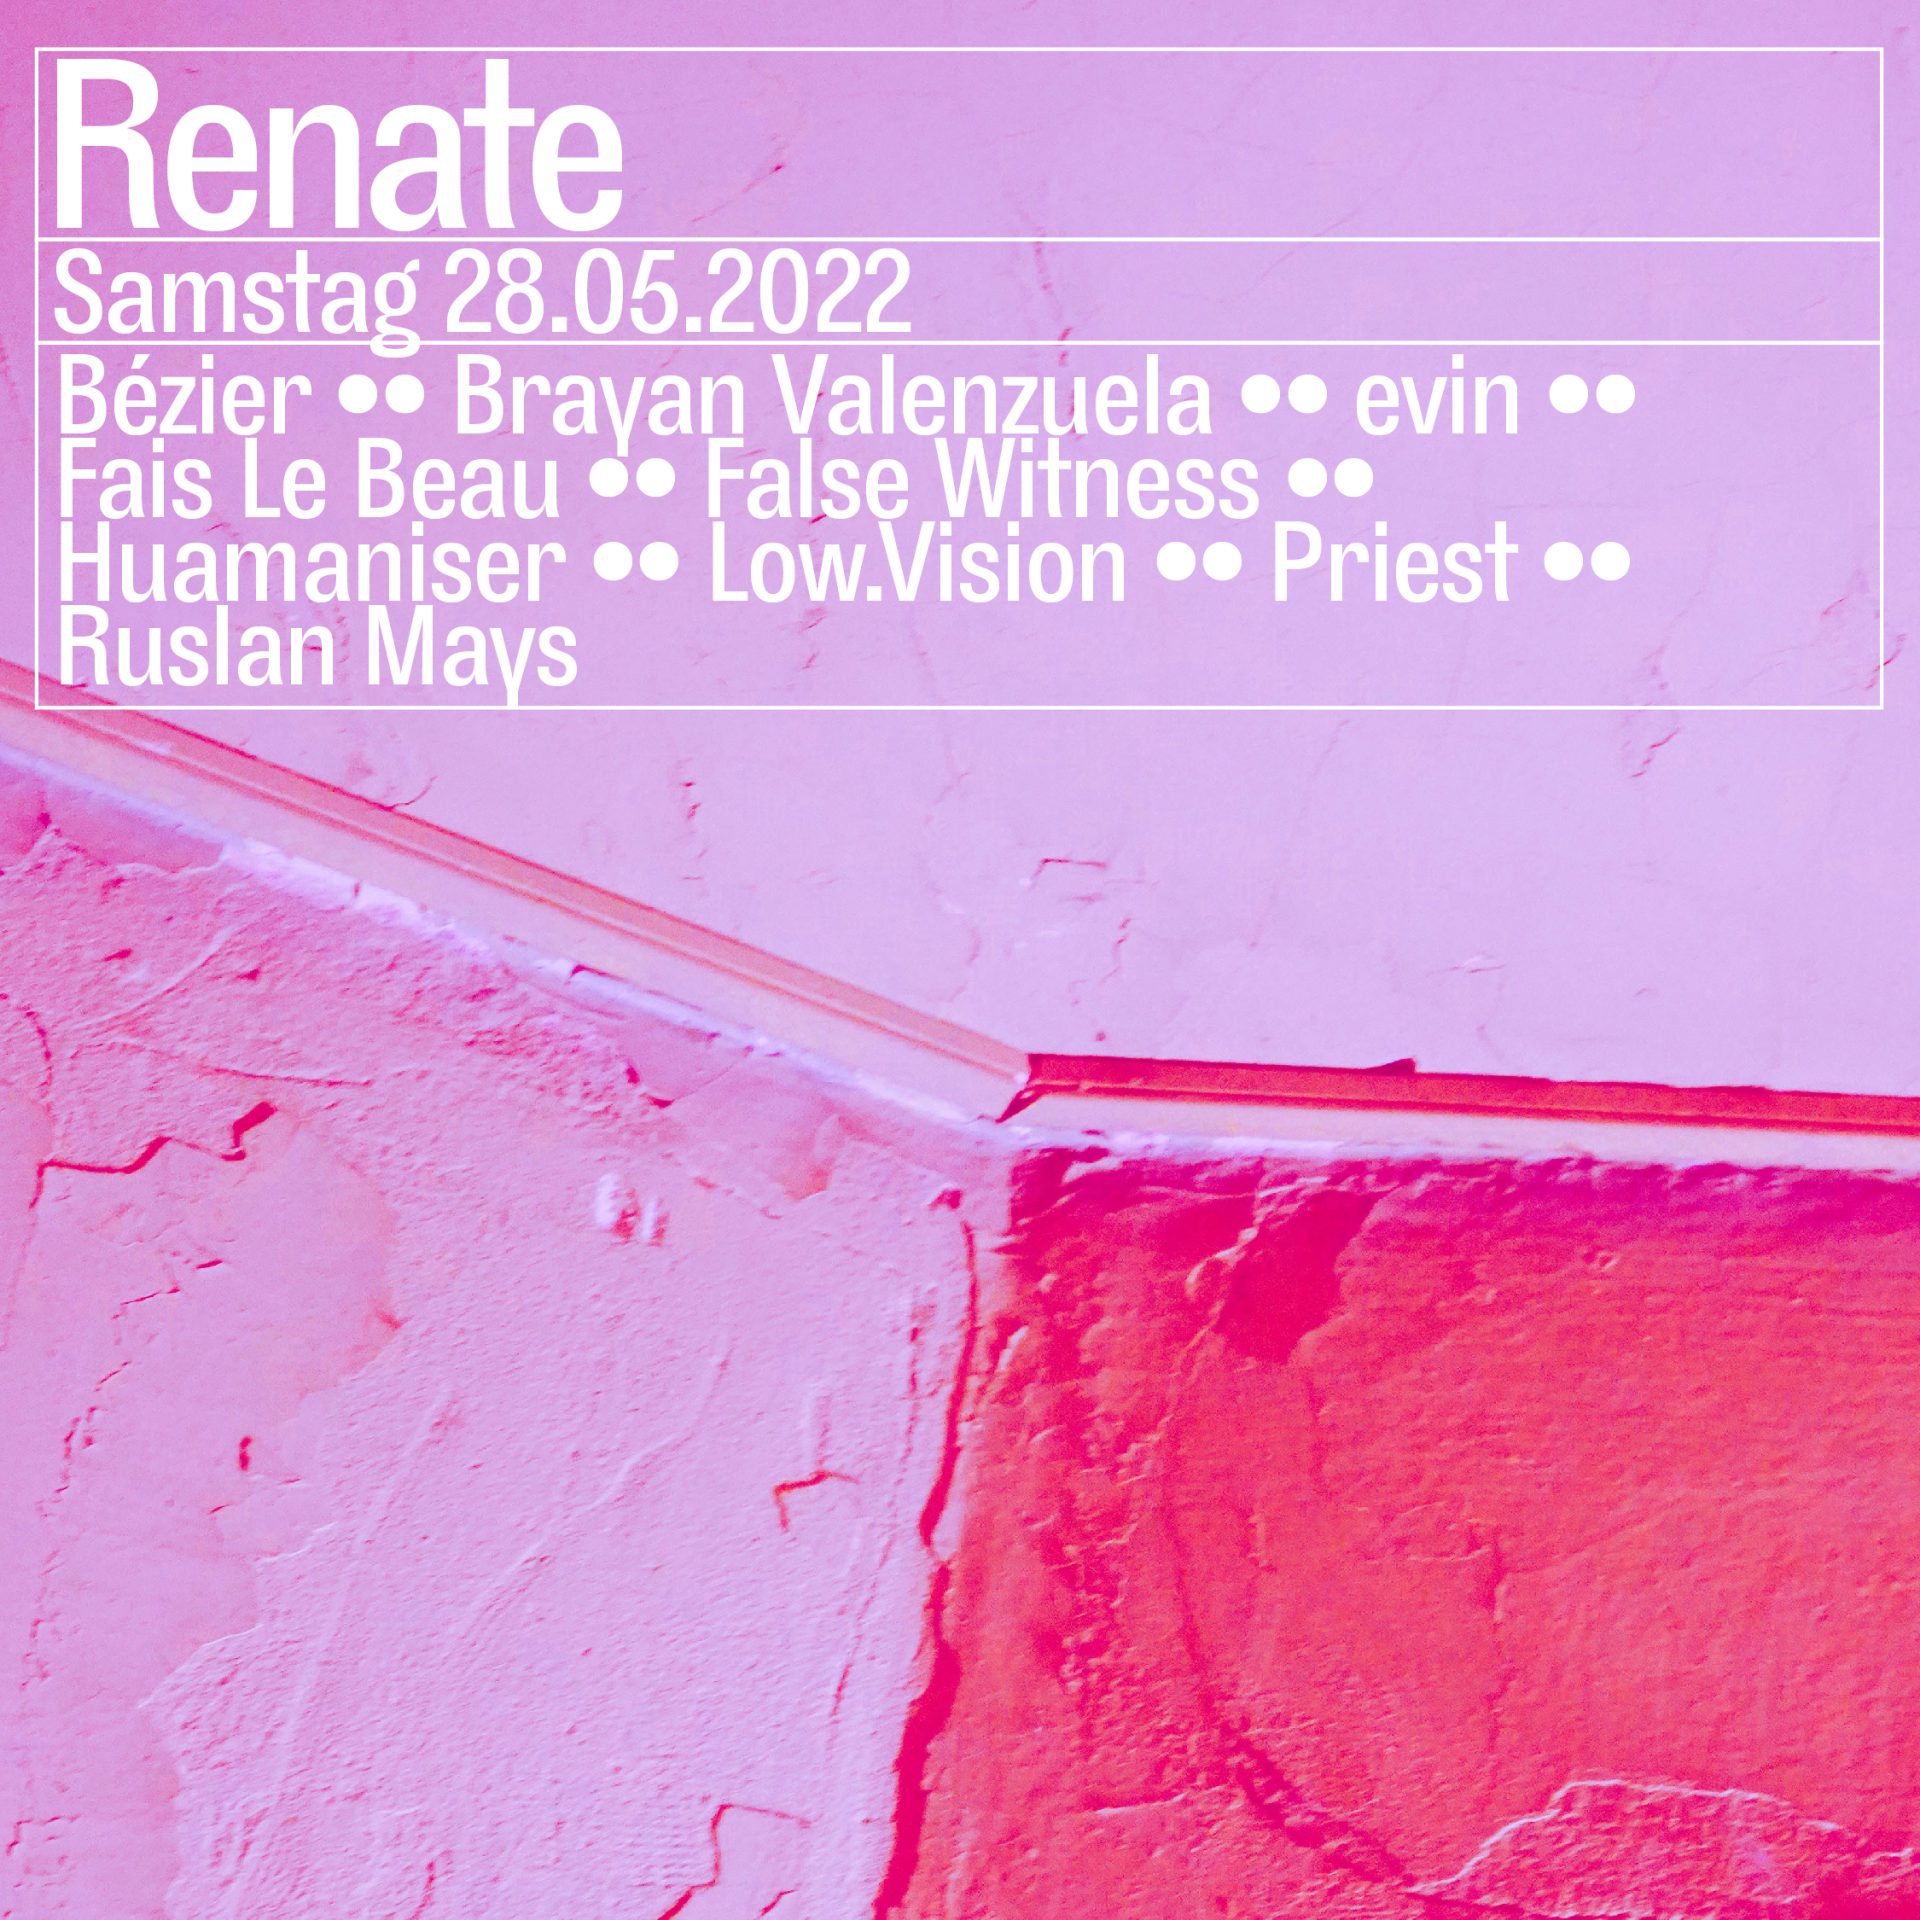 Flyer for Renate with Fais Le Beau False Witness, Ruslan Mays May 28 2022 